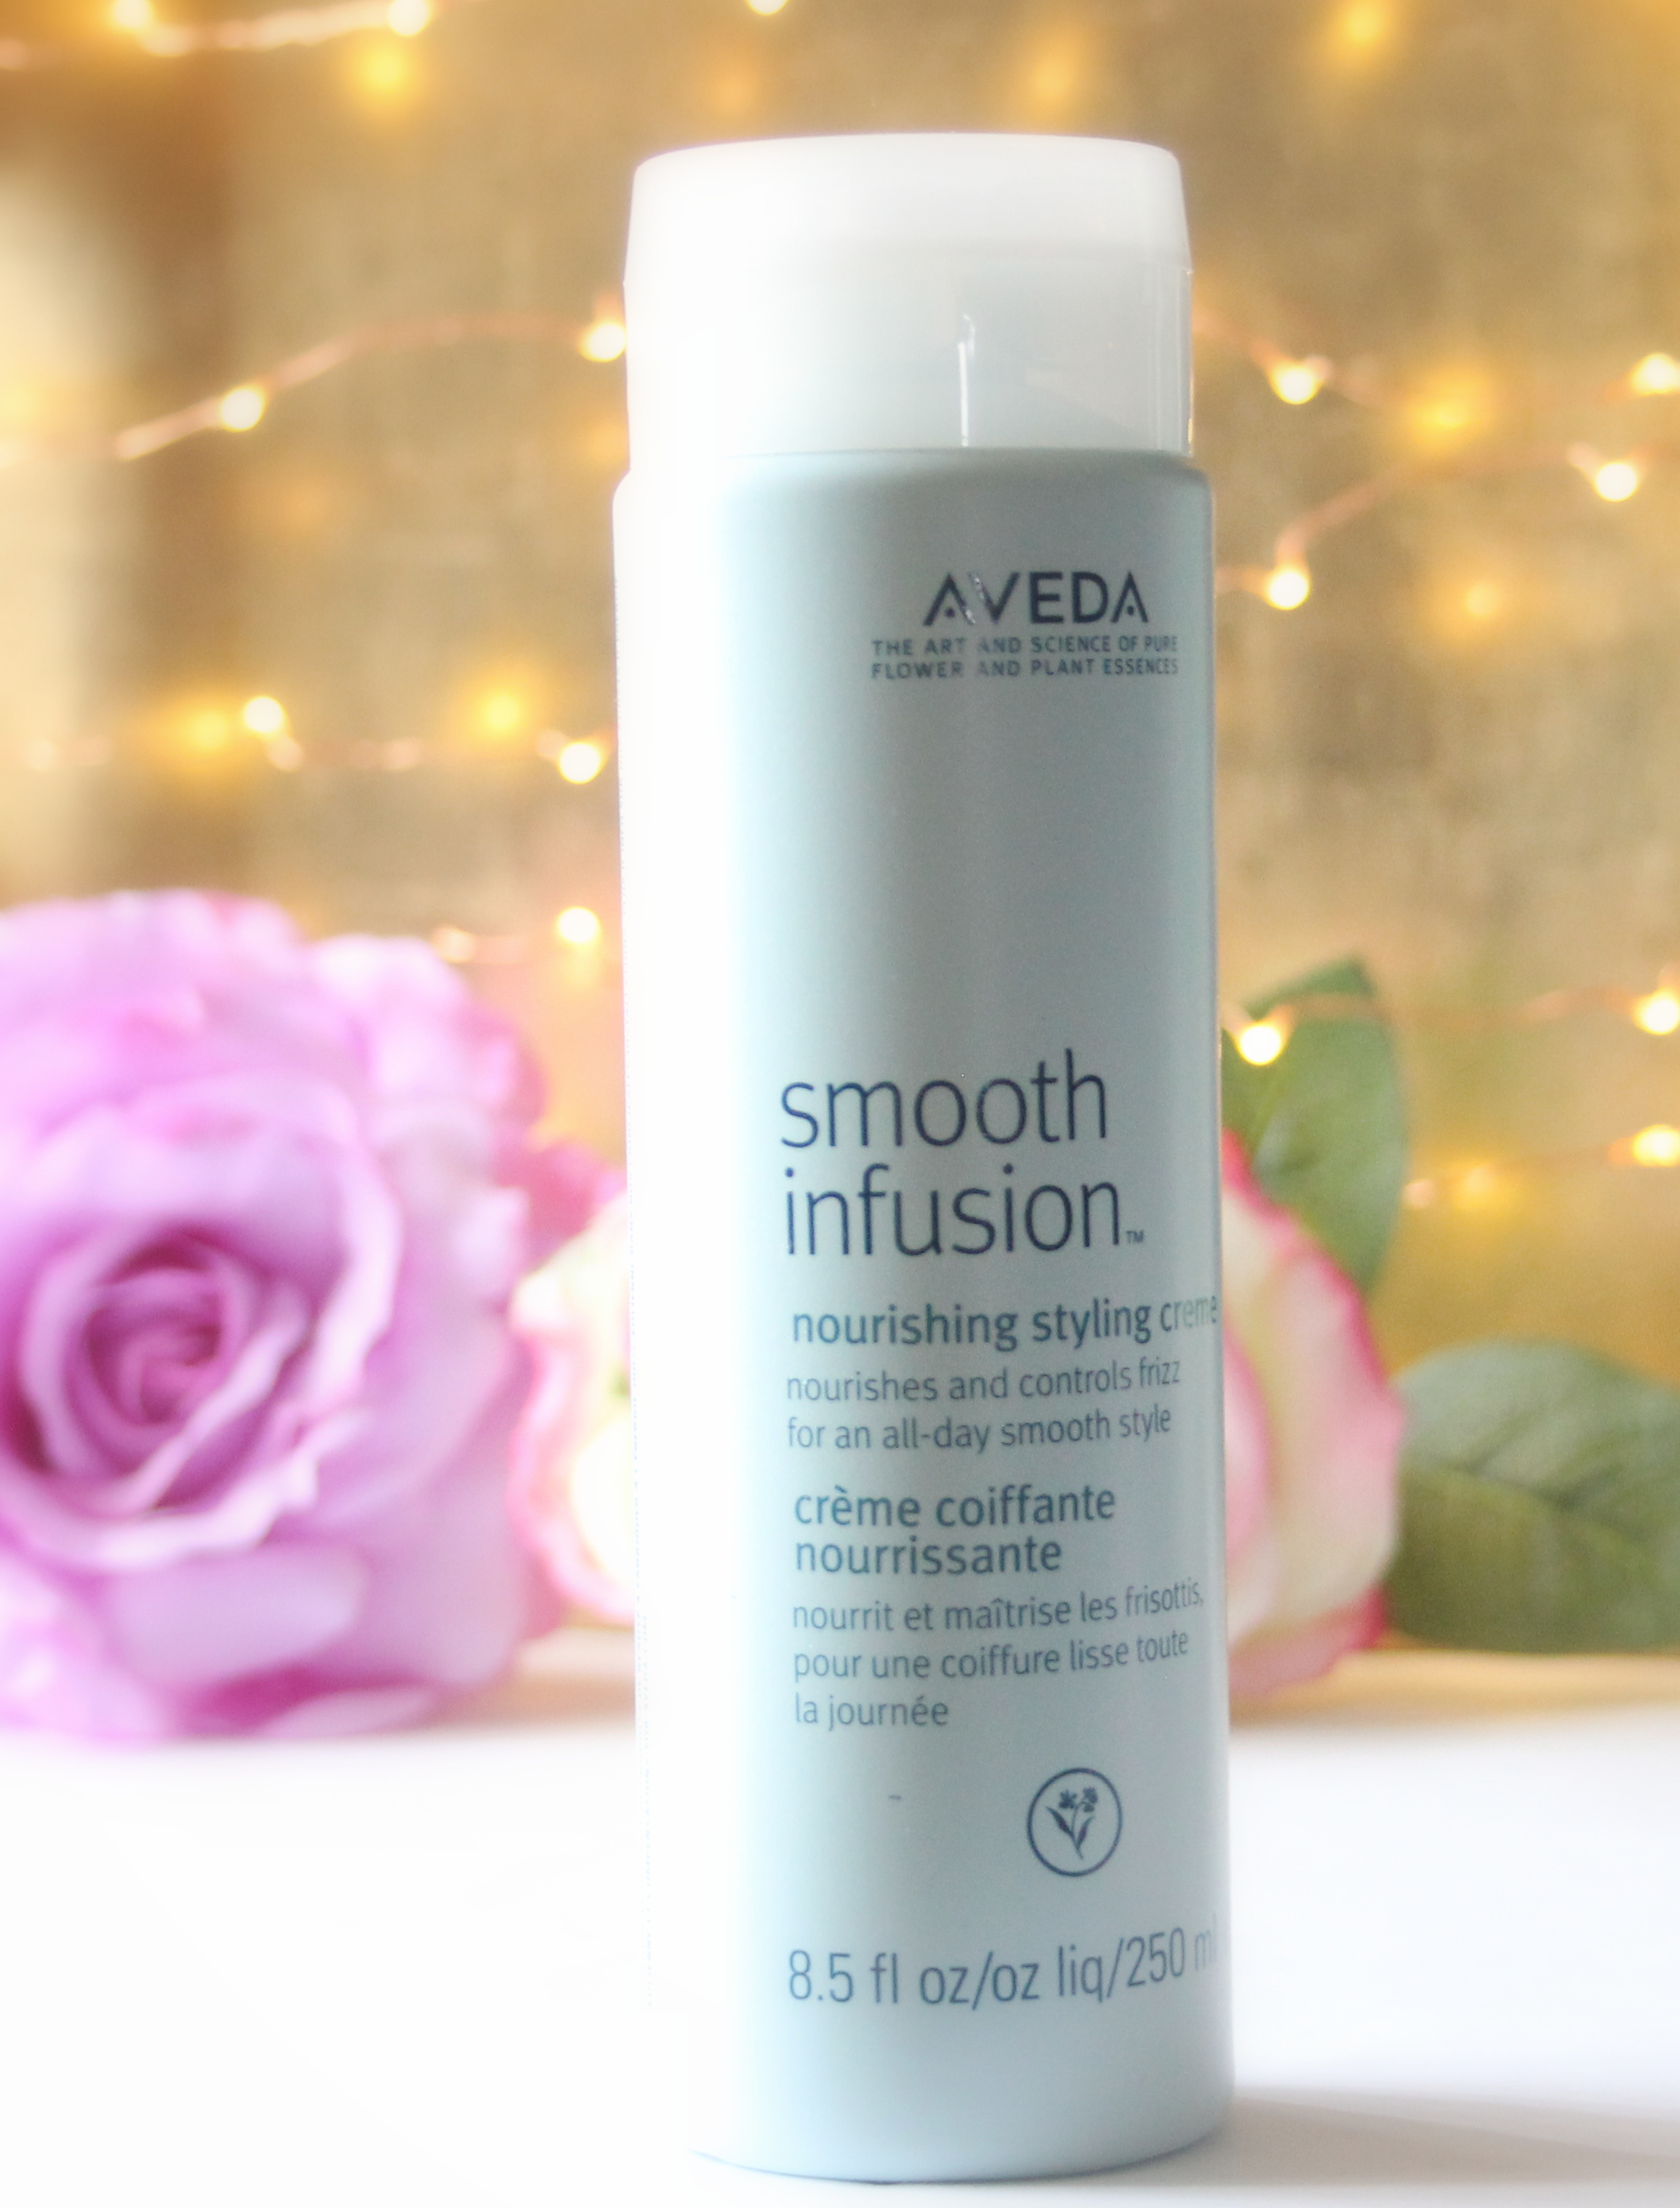 Aveda Smooth Infusion Review